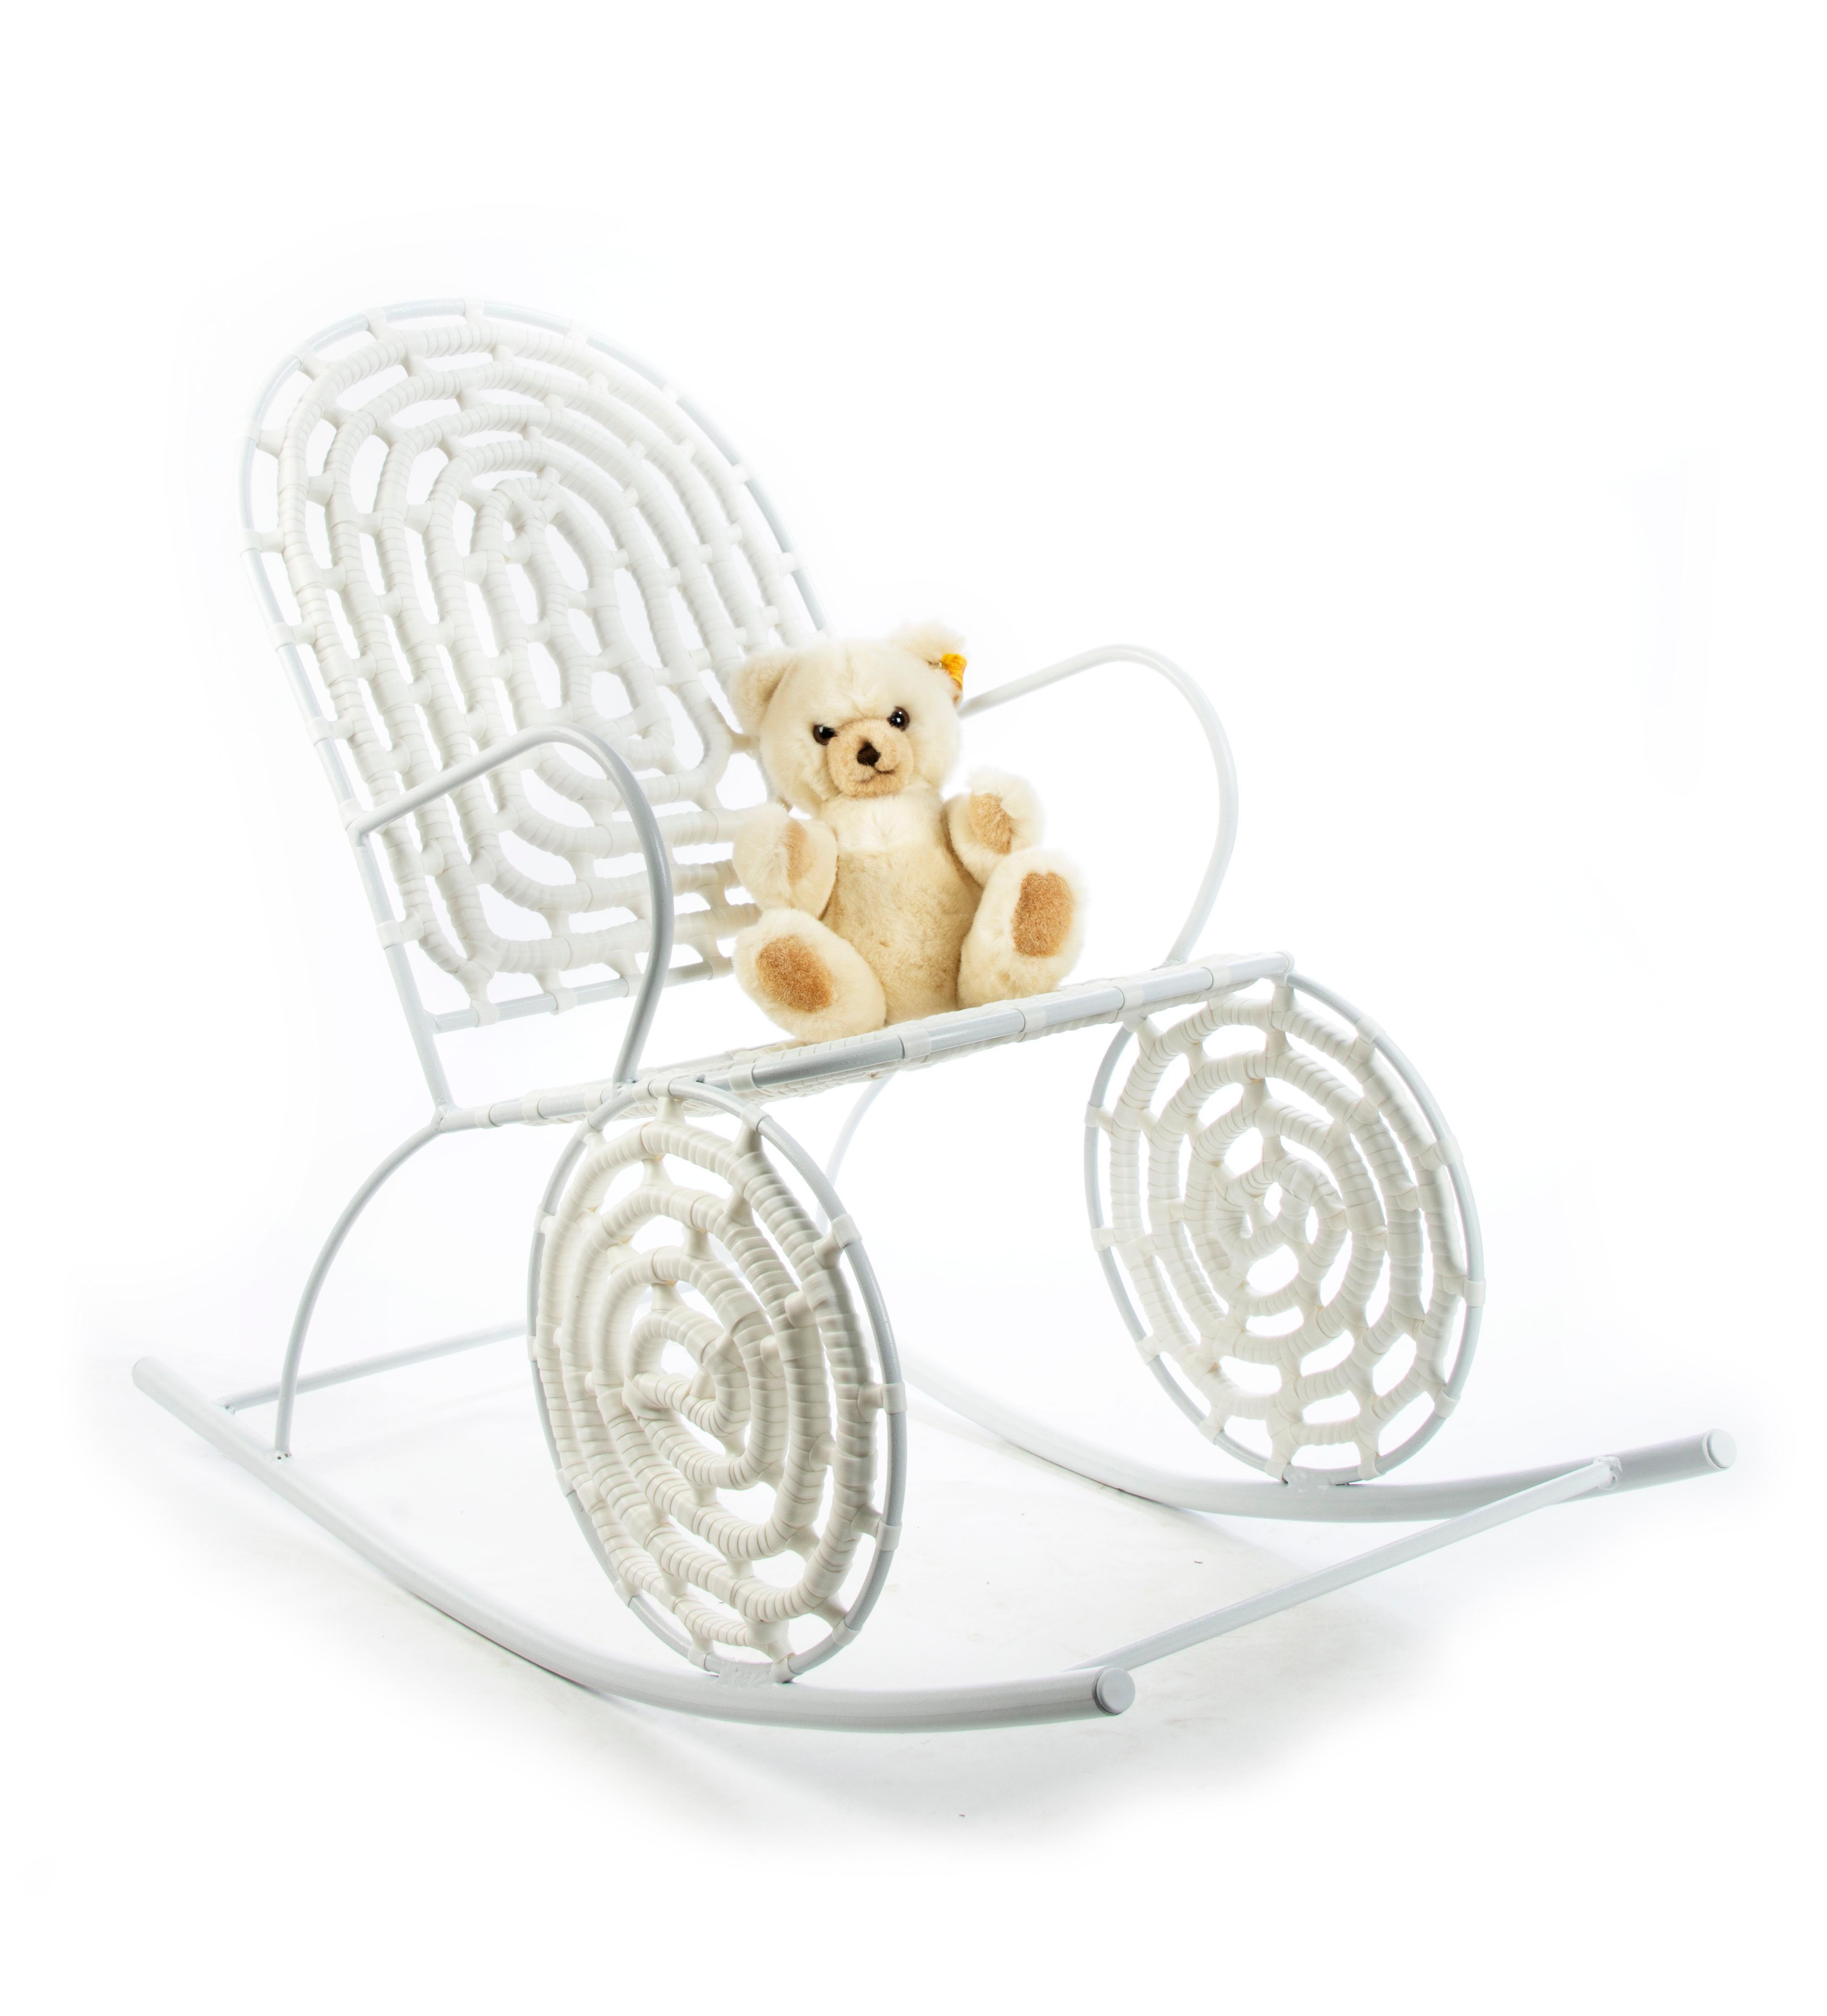 South African Rock-a-bye Baby Chair, 1 of 1 by Nawaaz Saldulker For Sale